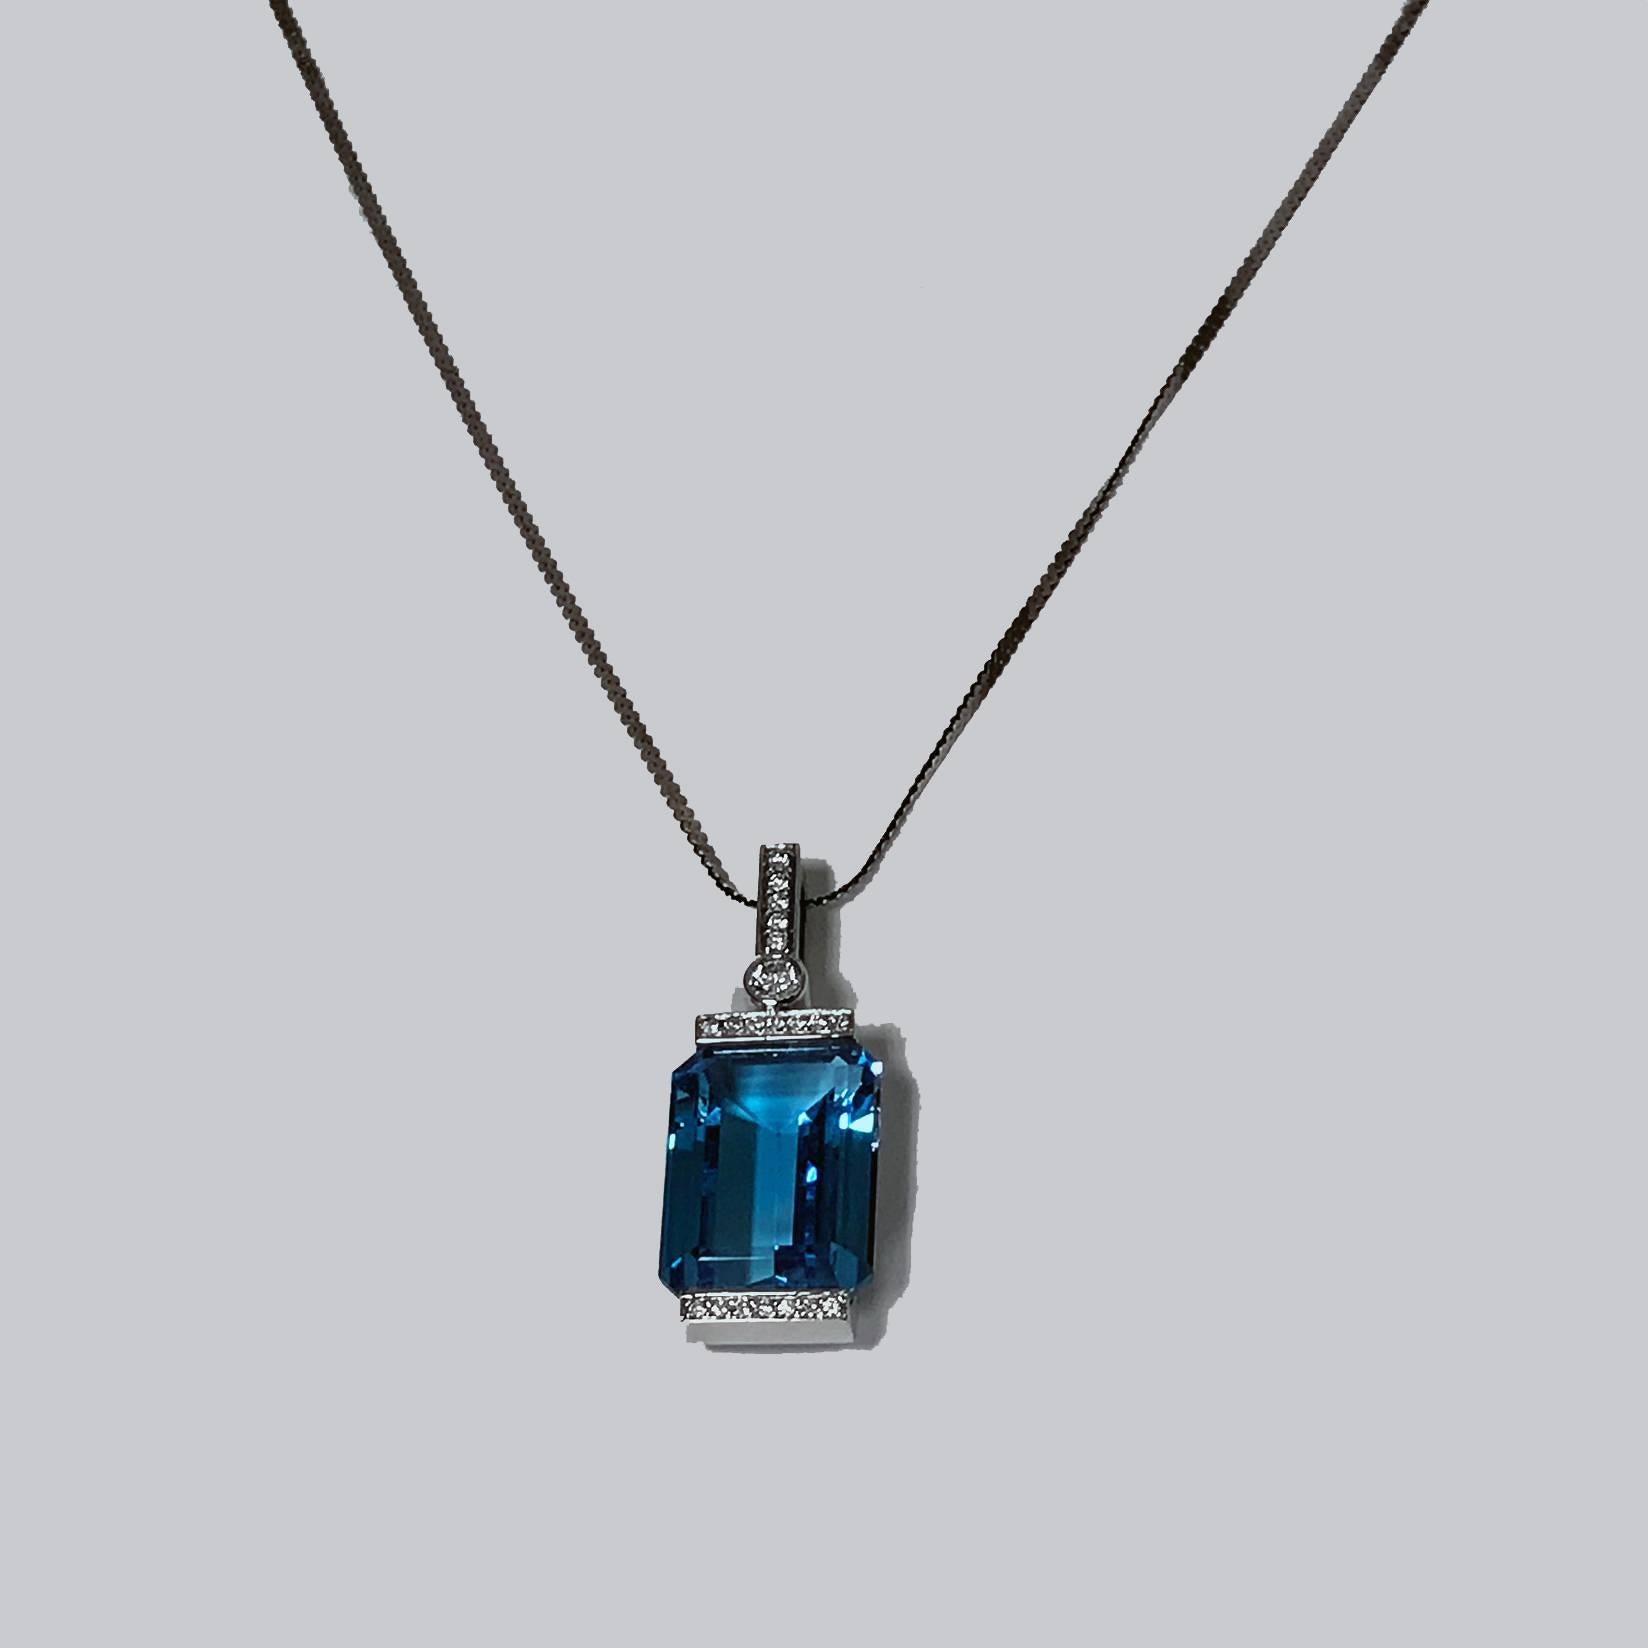 18K white gold mounted Blue Topaz and Diamond Pendant. Rectangular large step cut Blue Topaz accented with small diamonds, 0.48 ct, SI, G, together with 14K white gold chain attached, length 20 inches.